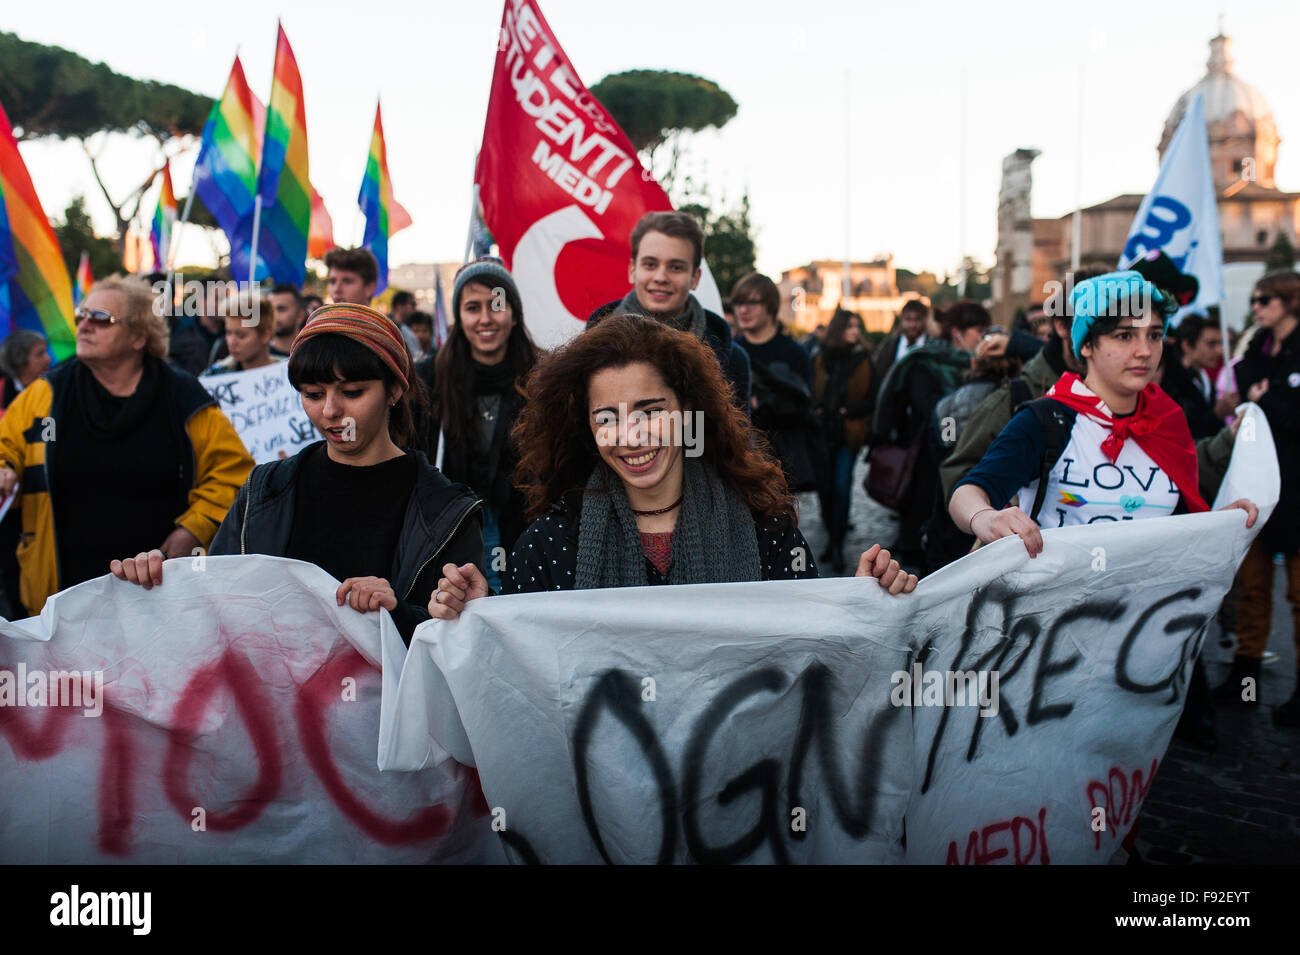 People march for gay and lgbt rights in rome with rainbows flags Stock Photo